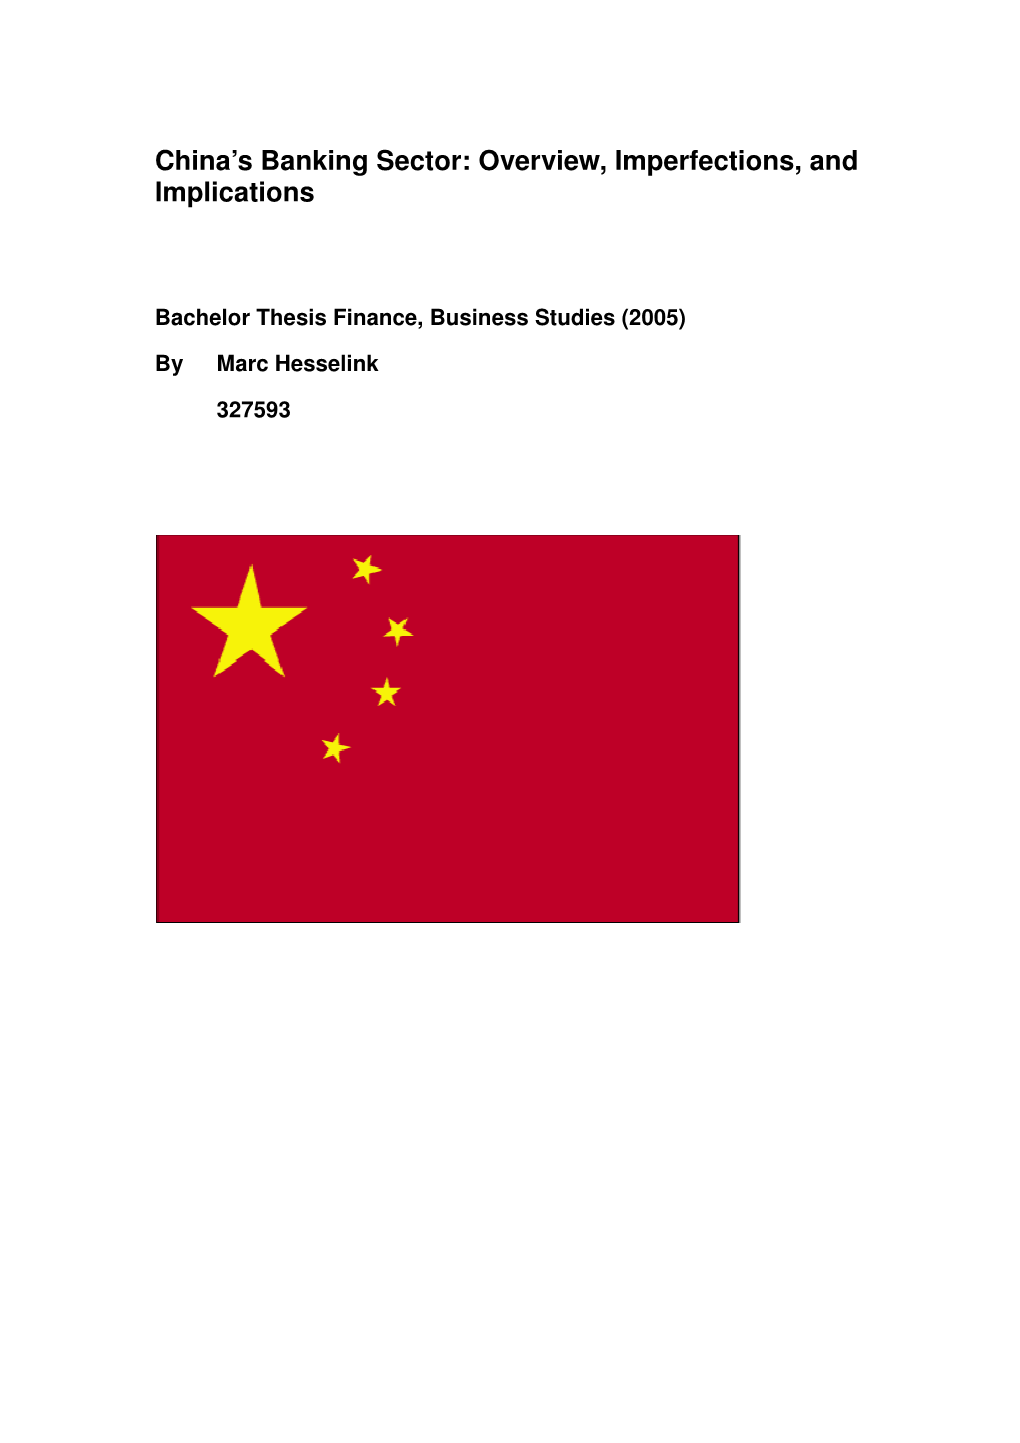 China's Banking Sector: Overview, Imperfections, and Implications